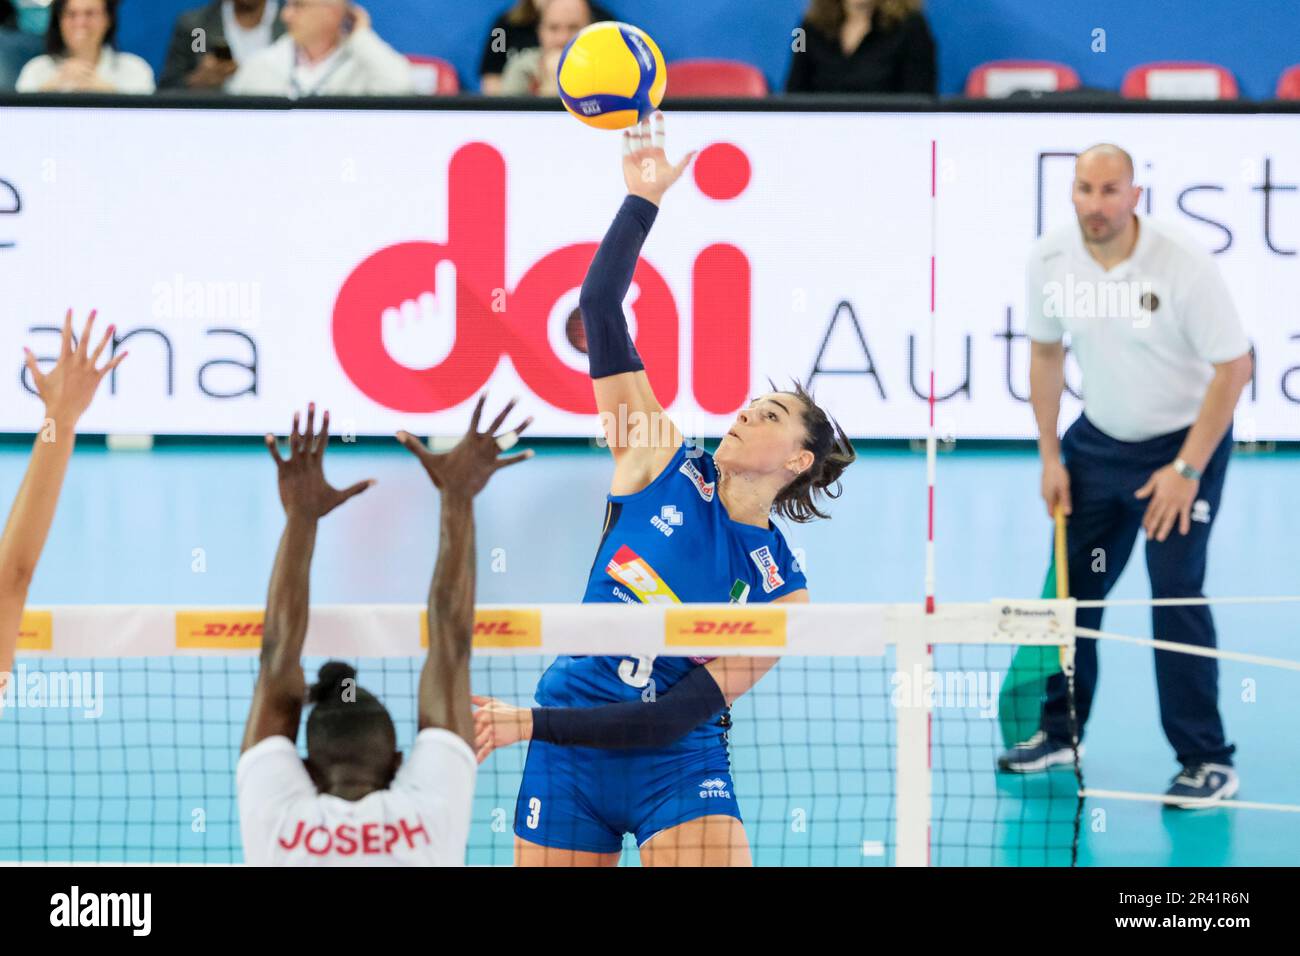 Francesca Villani of Italy in action during the DHL Test Match Tournament women’s volleyball between Italy and Canada at Palazzetto dello Sport. Final score; Italy 3:1 Canada. Stock Photo